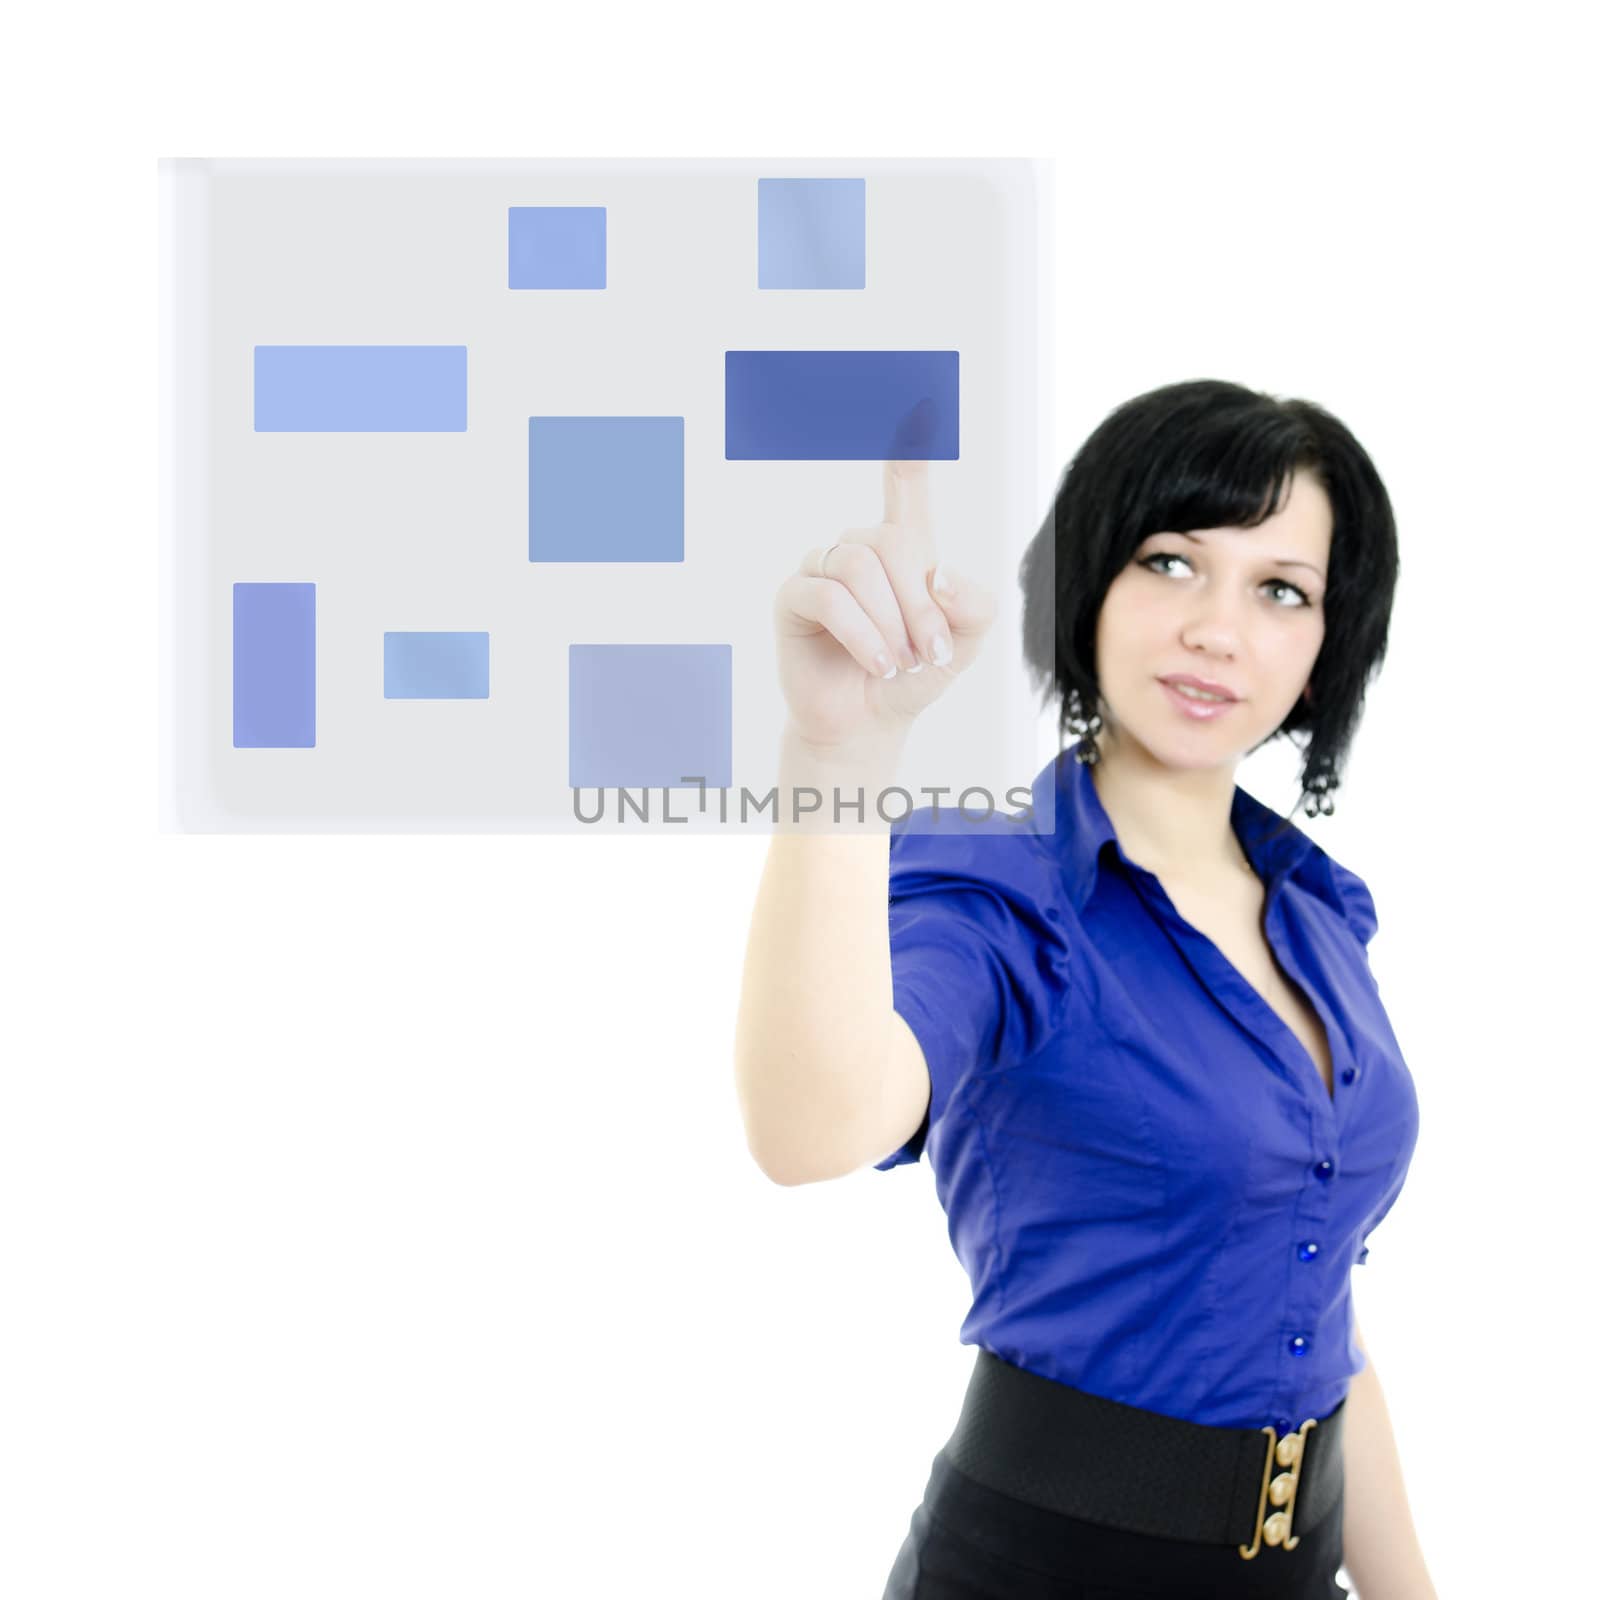 Attractive executive woman pushing on a touch screen interface. Isolated on white.